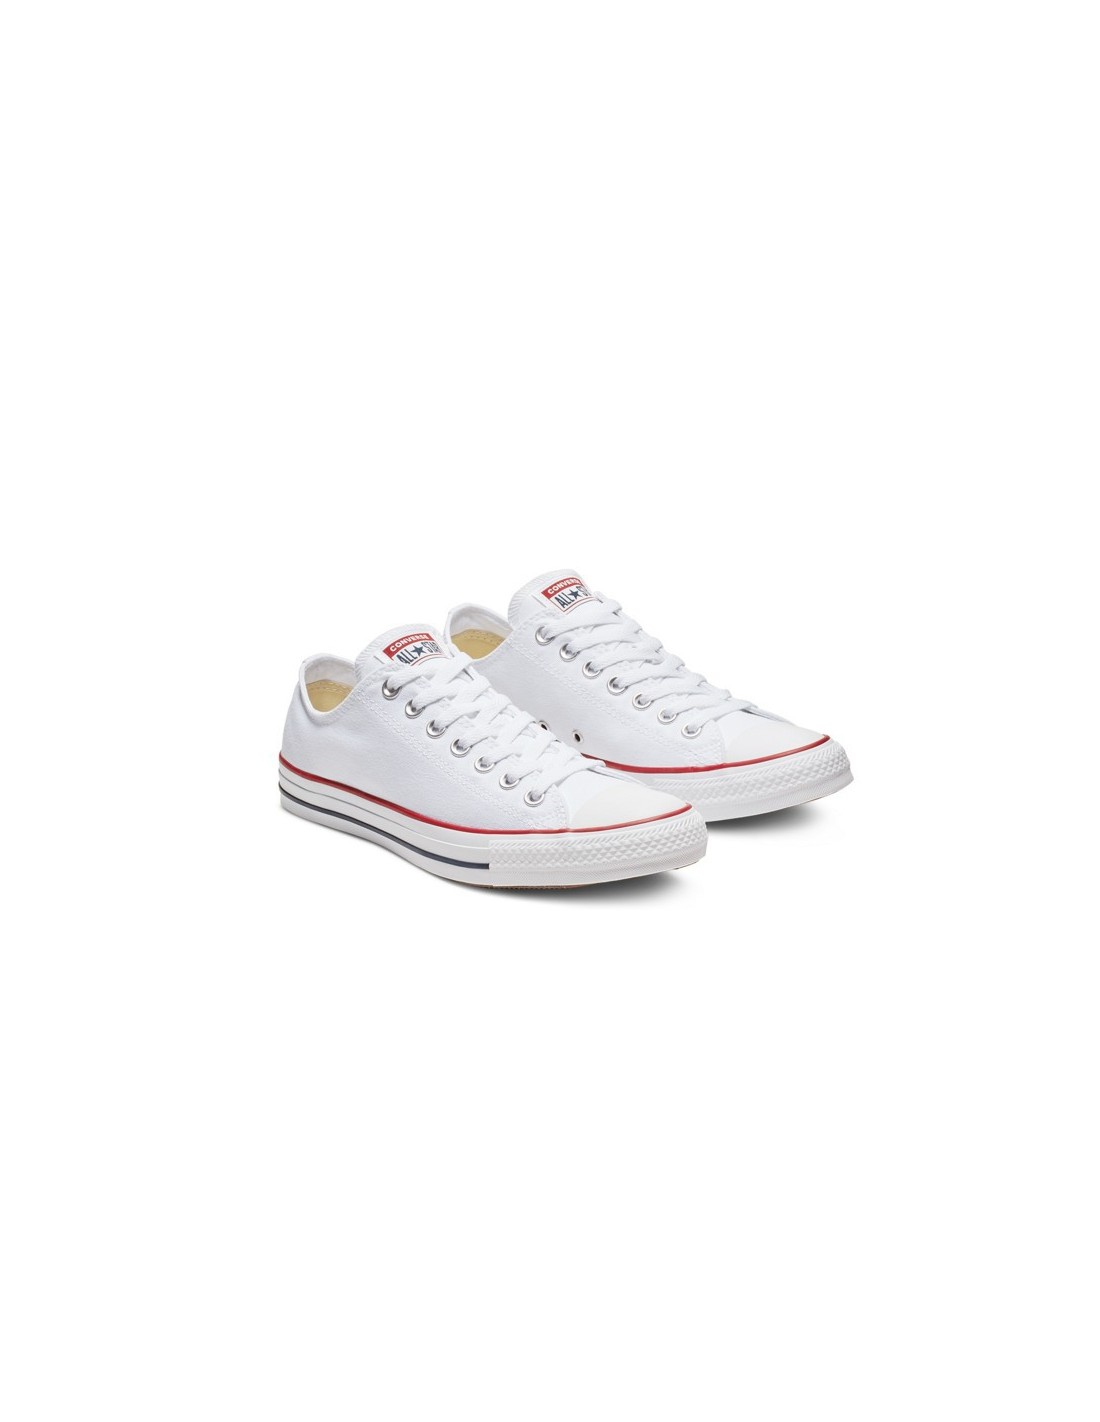 CONVERSE CHUCK TAYLOR ALL STAR LOW WHITE